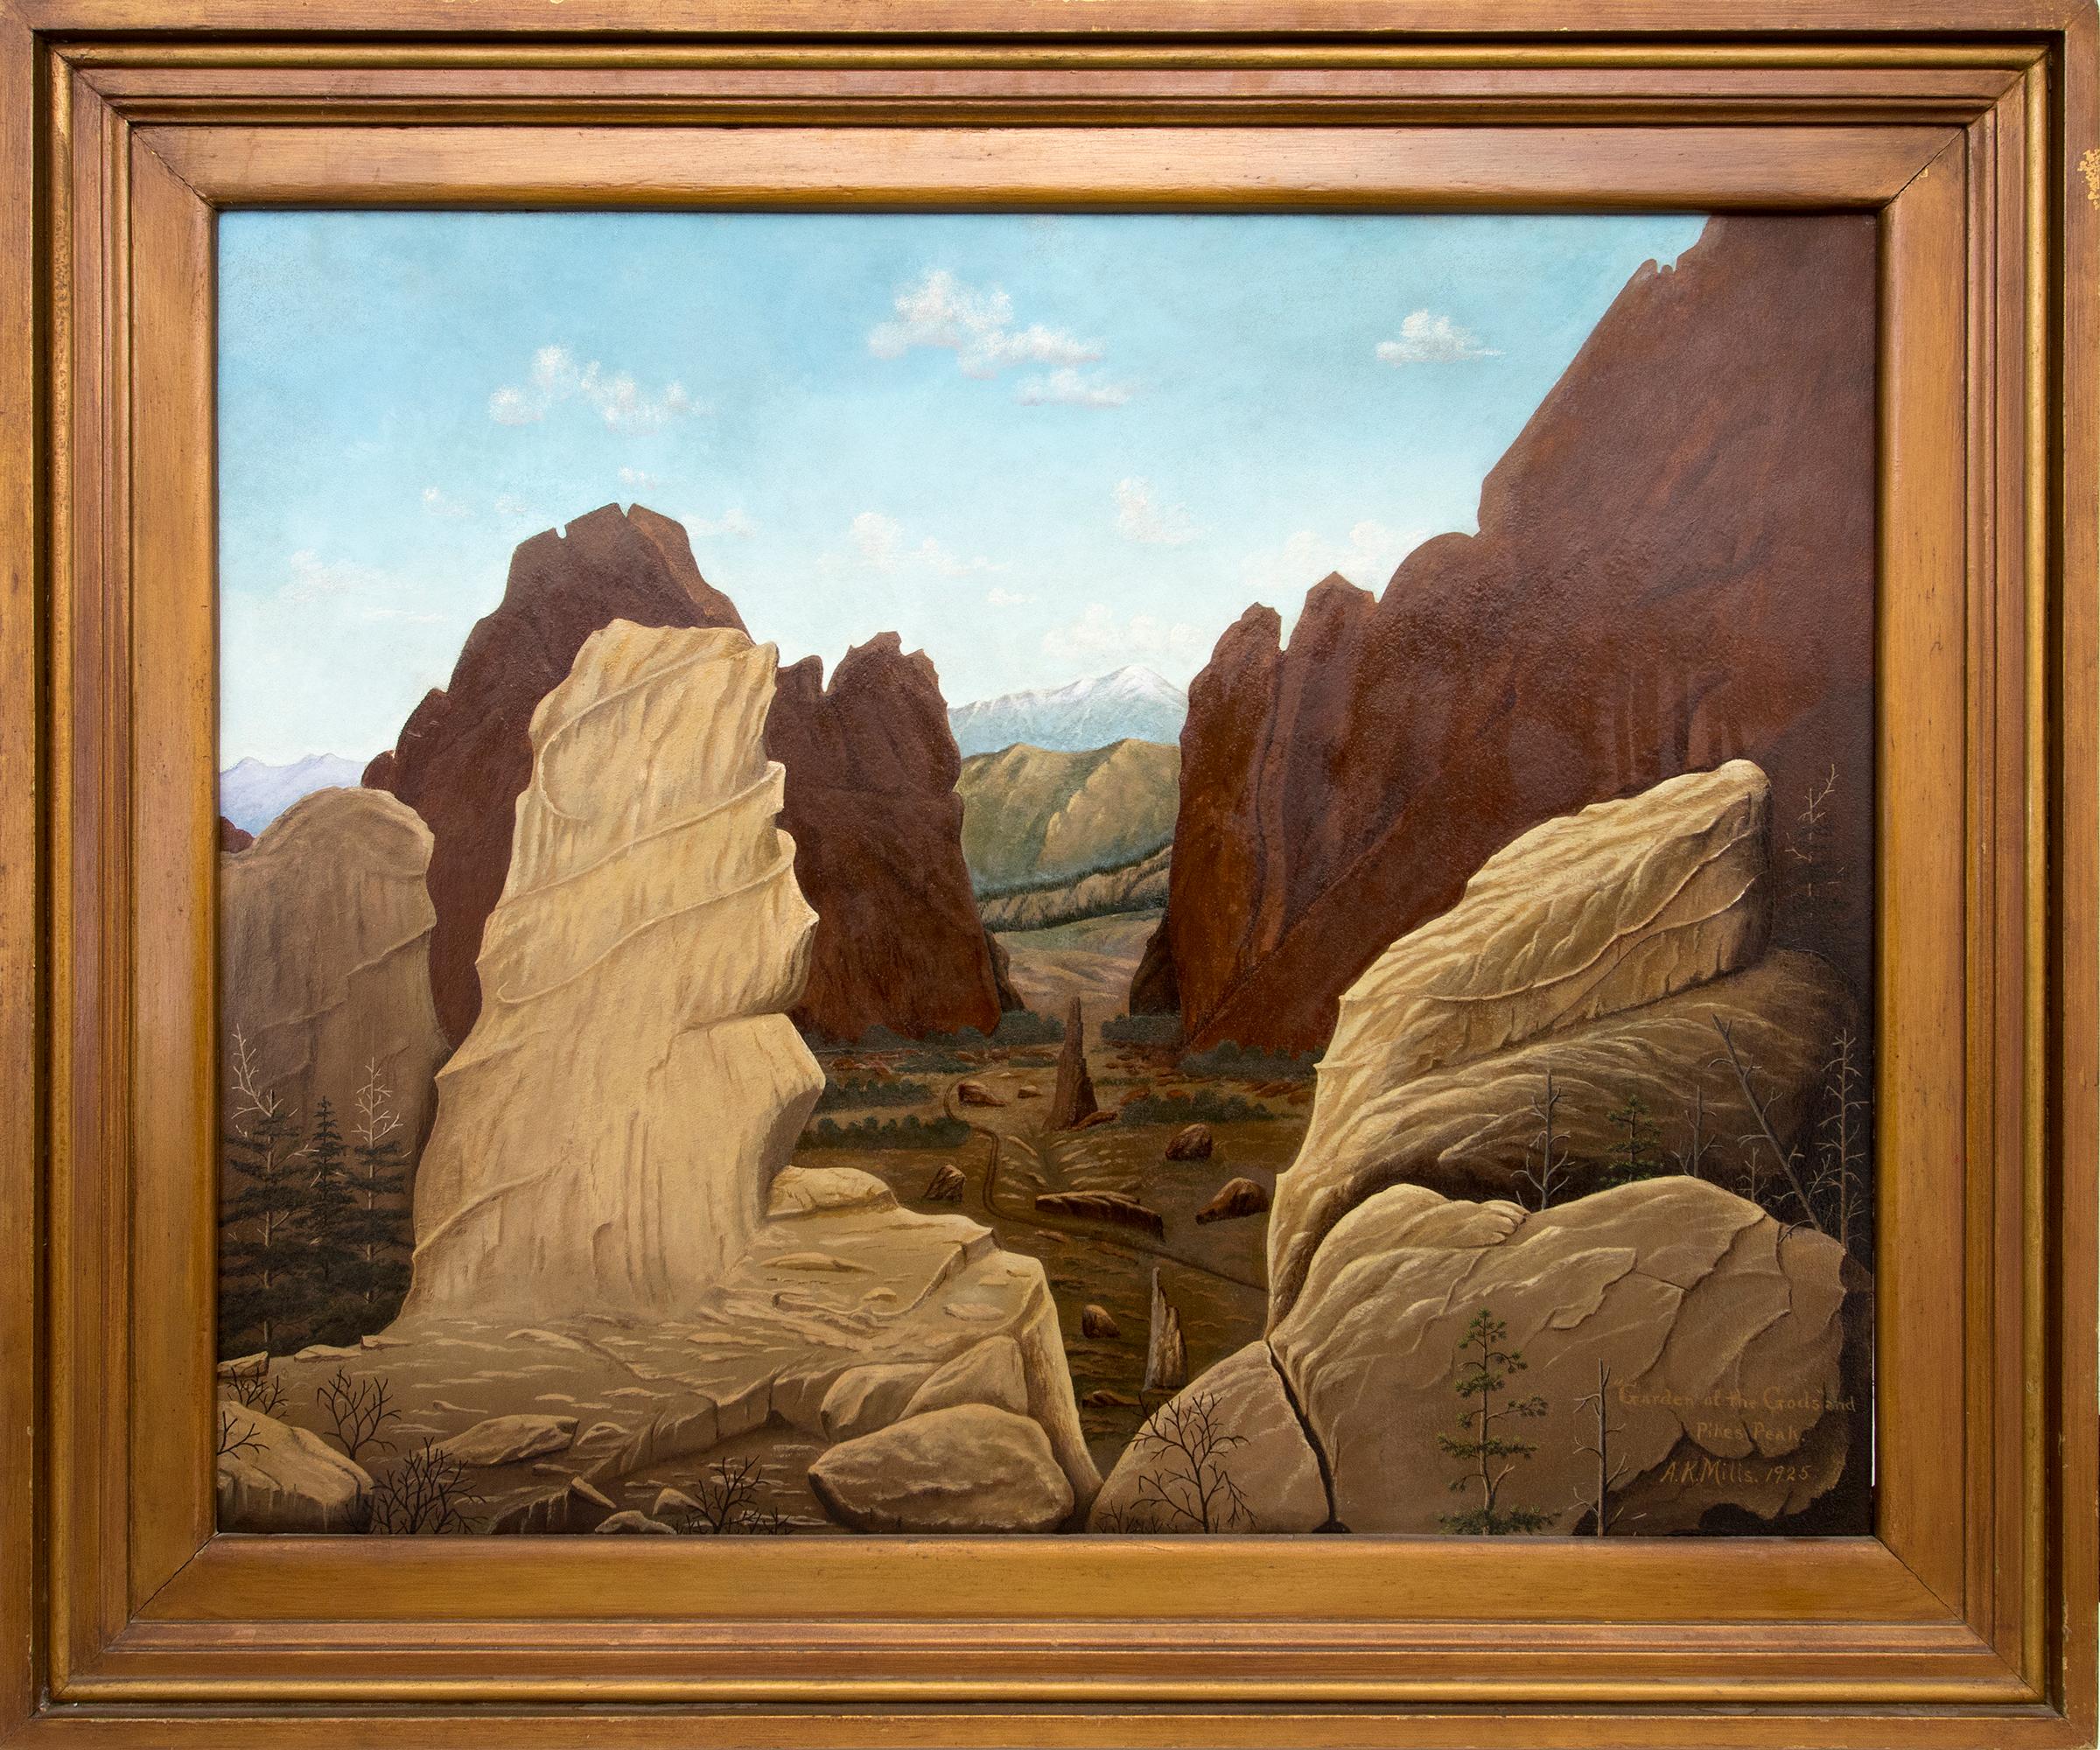 Garden of the Gods and Pikes Peak, Colorado, Southwestern Landscape Painting 